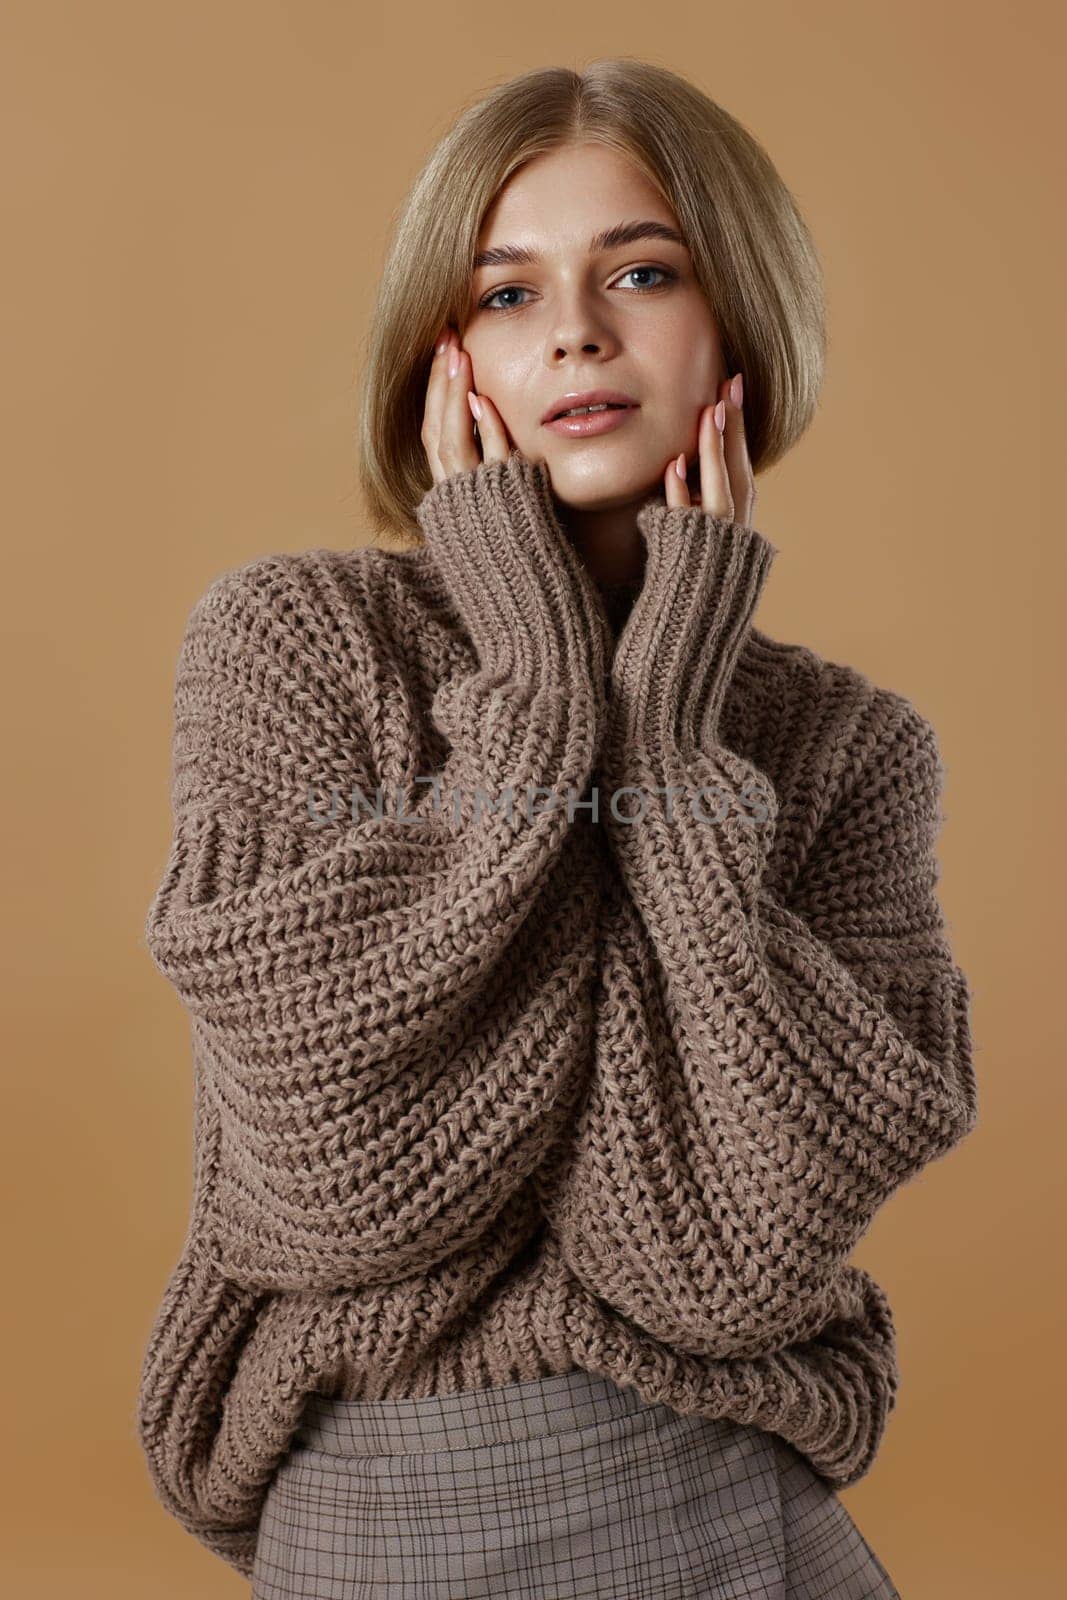 beautiful blonde woman in brown knitted sweater on beige background. autumn style